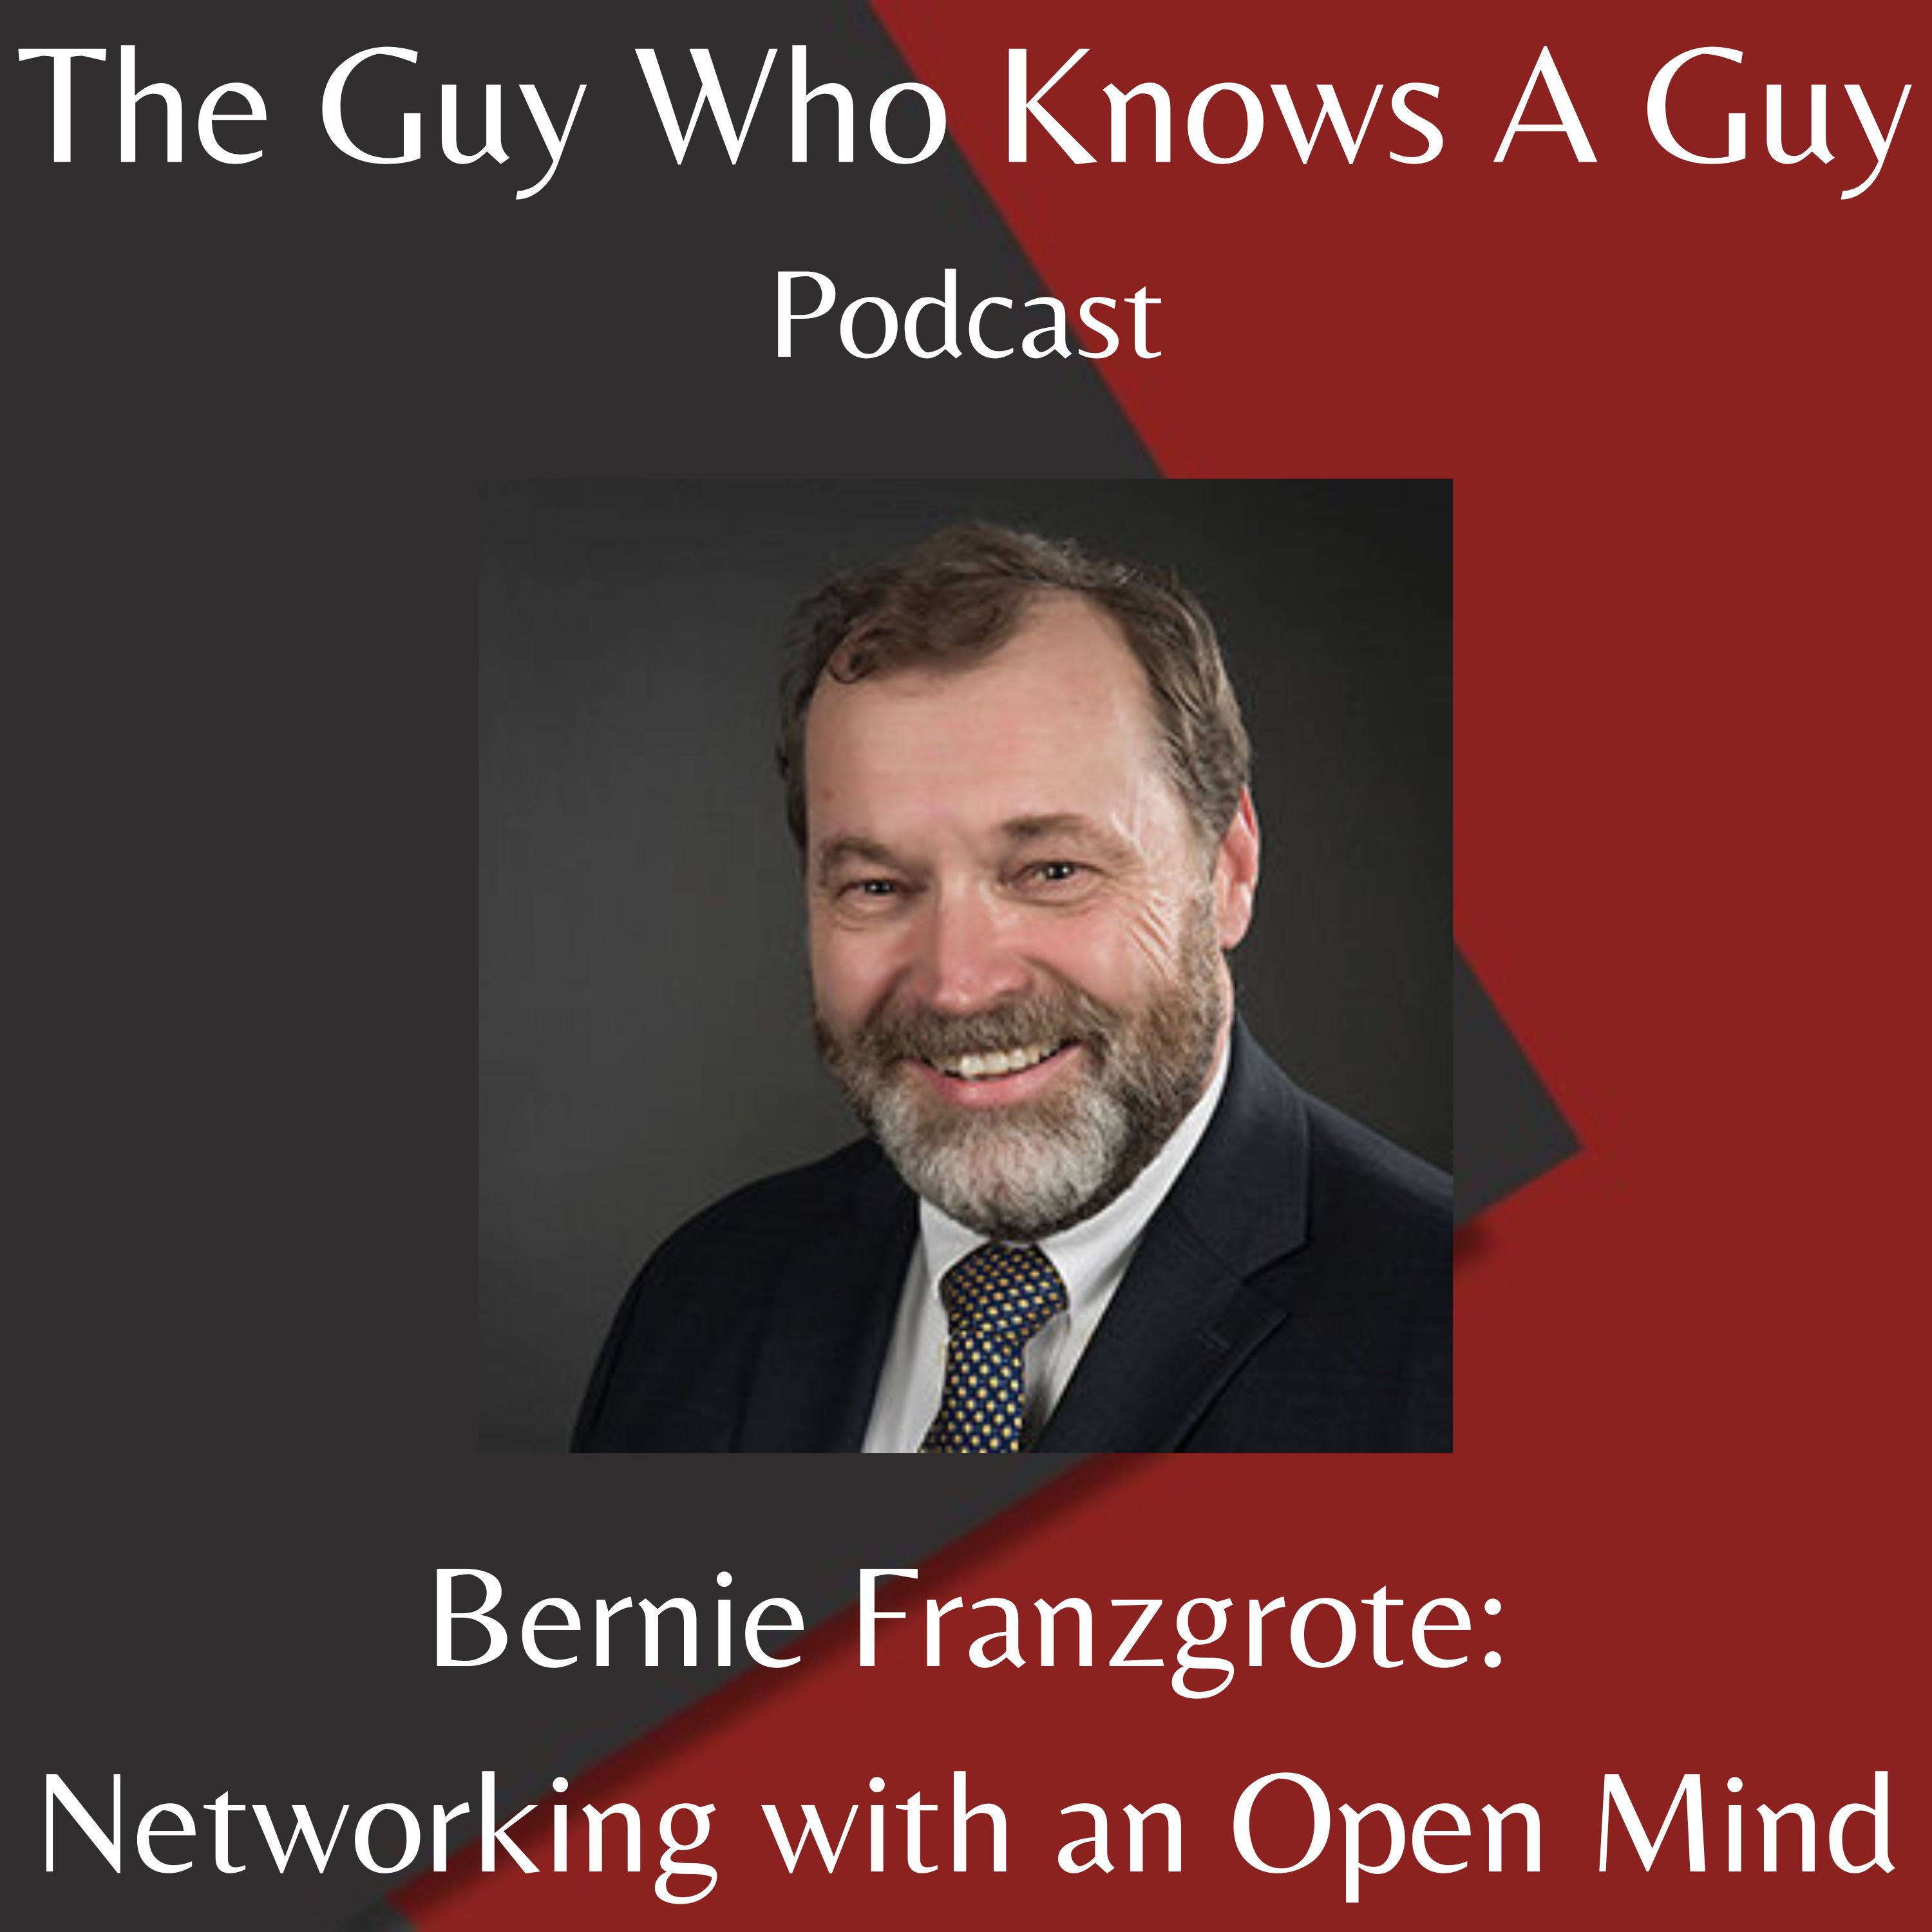 Bernie Franzgrote: Networking with an Open Mind